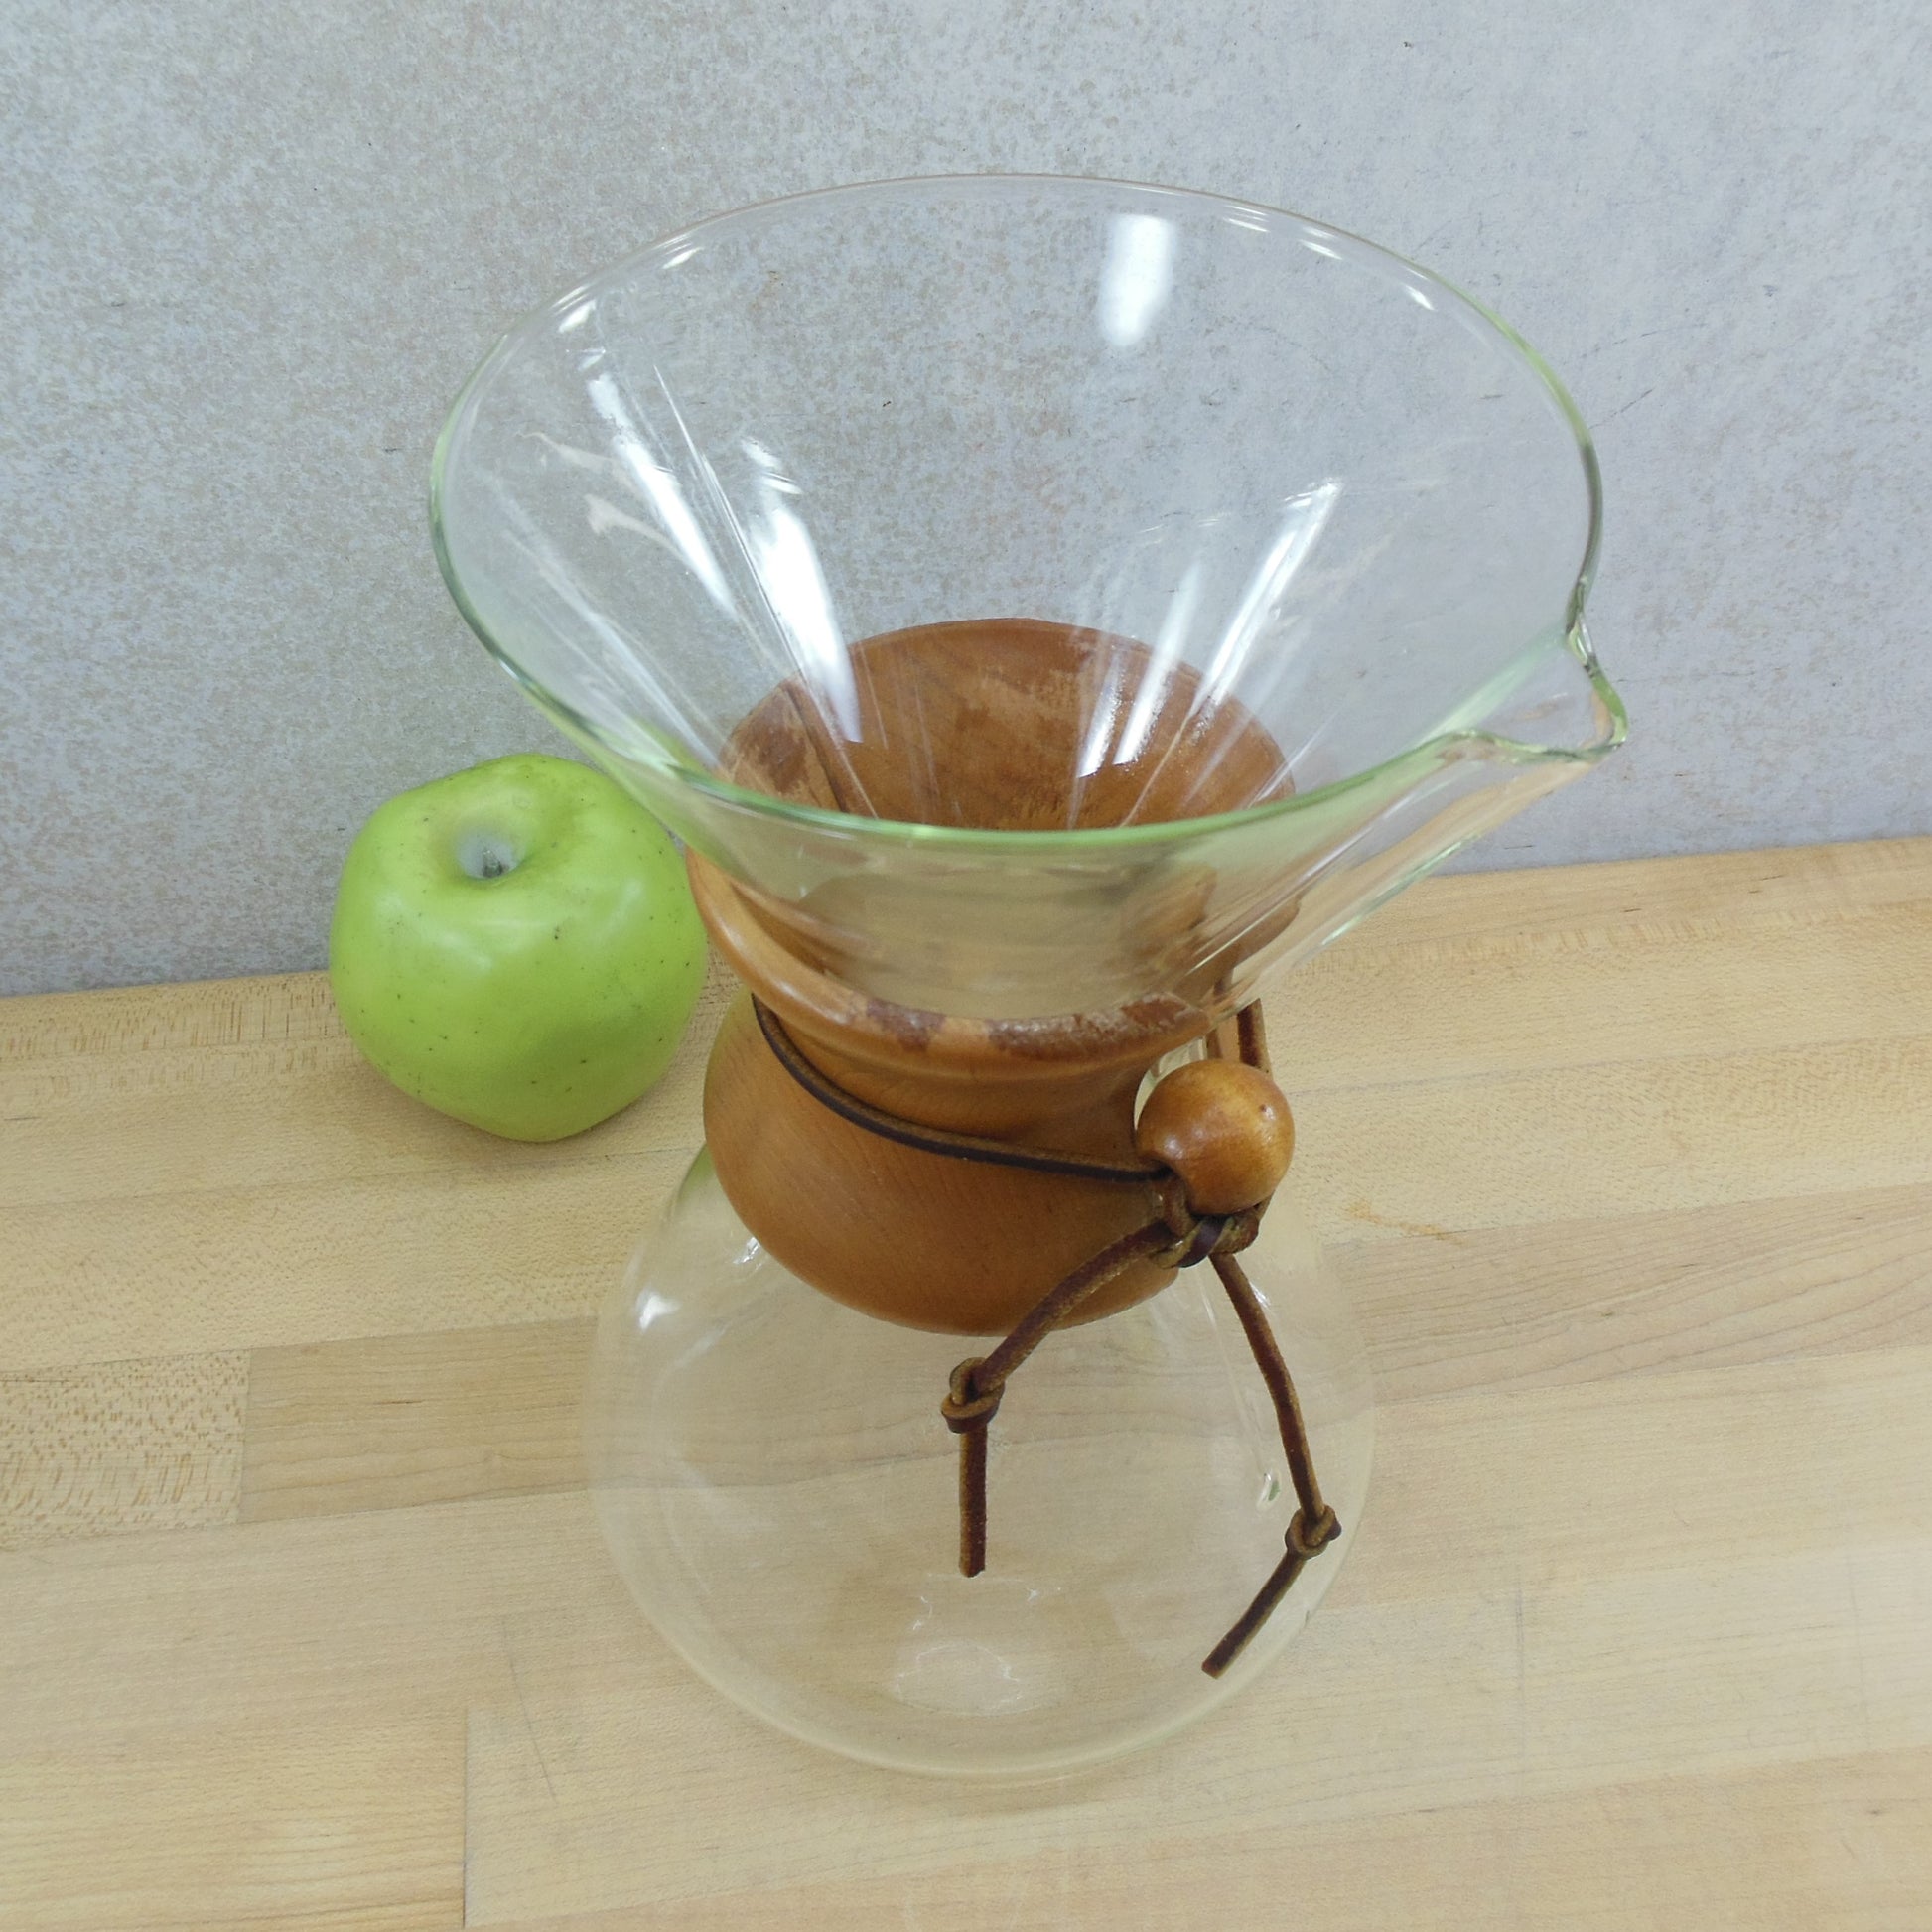 Chemex Auer Glas Germany 9.5" Pour Over Coffee Maker Vintage Wood Collar